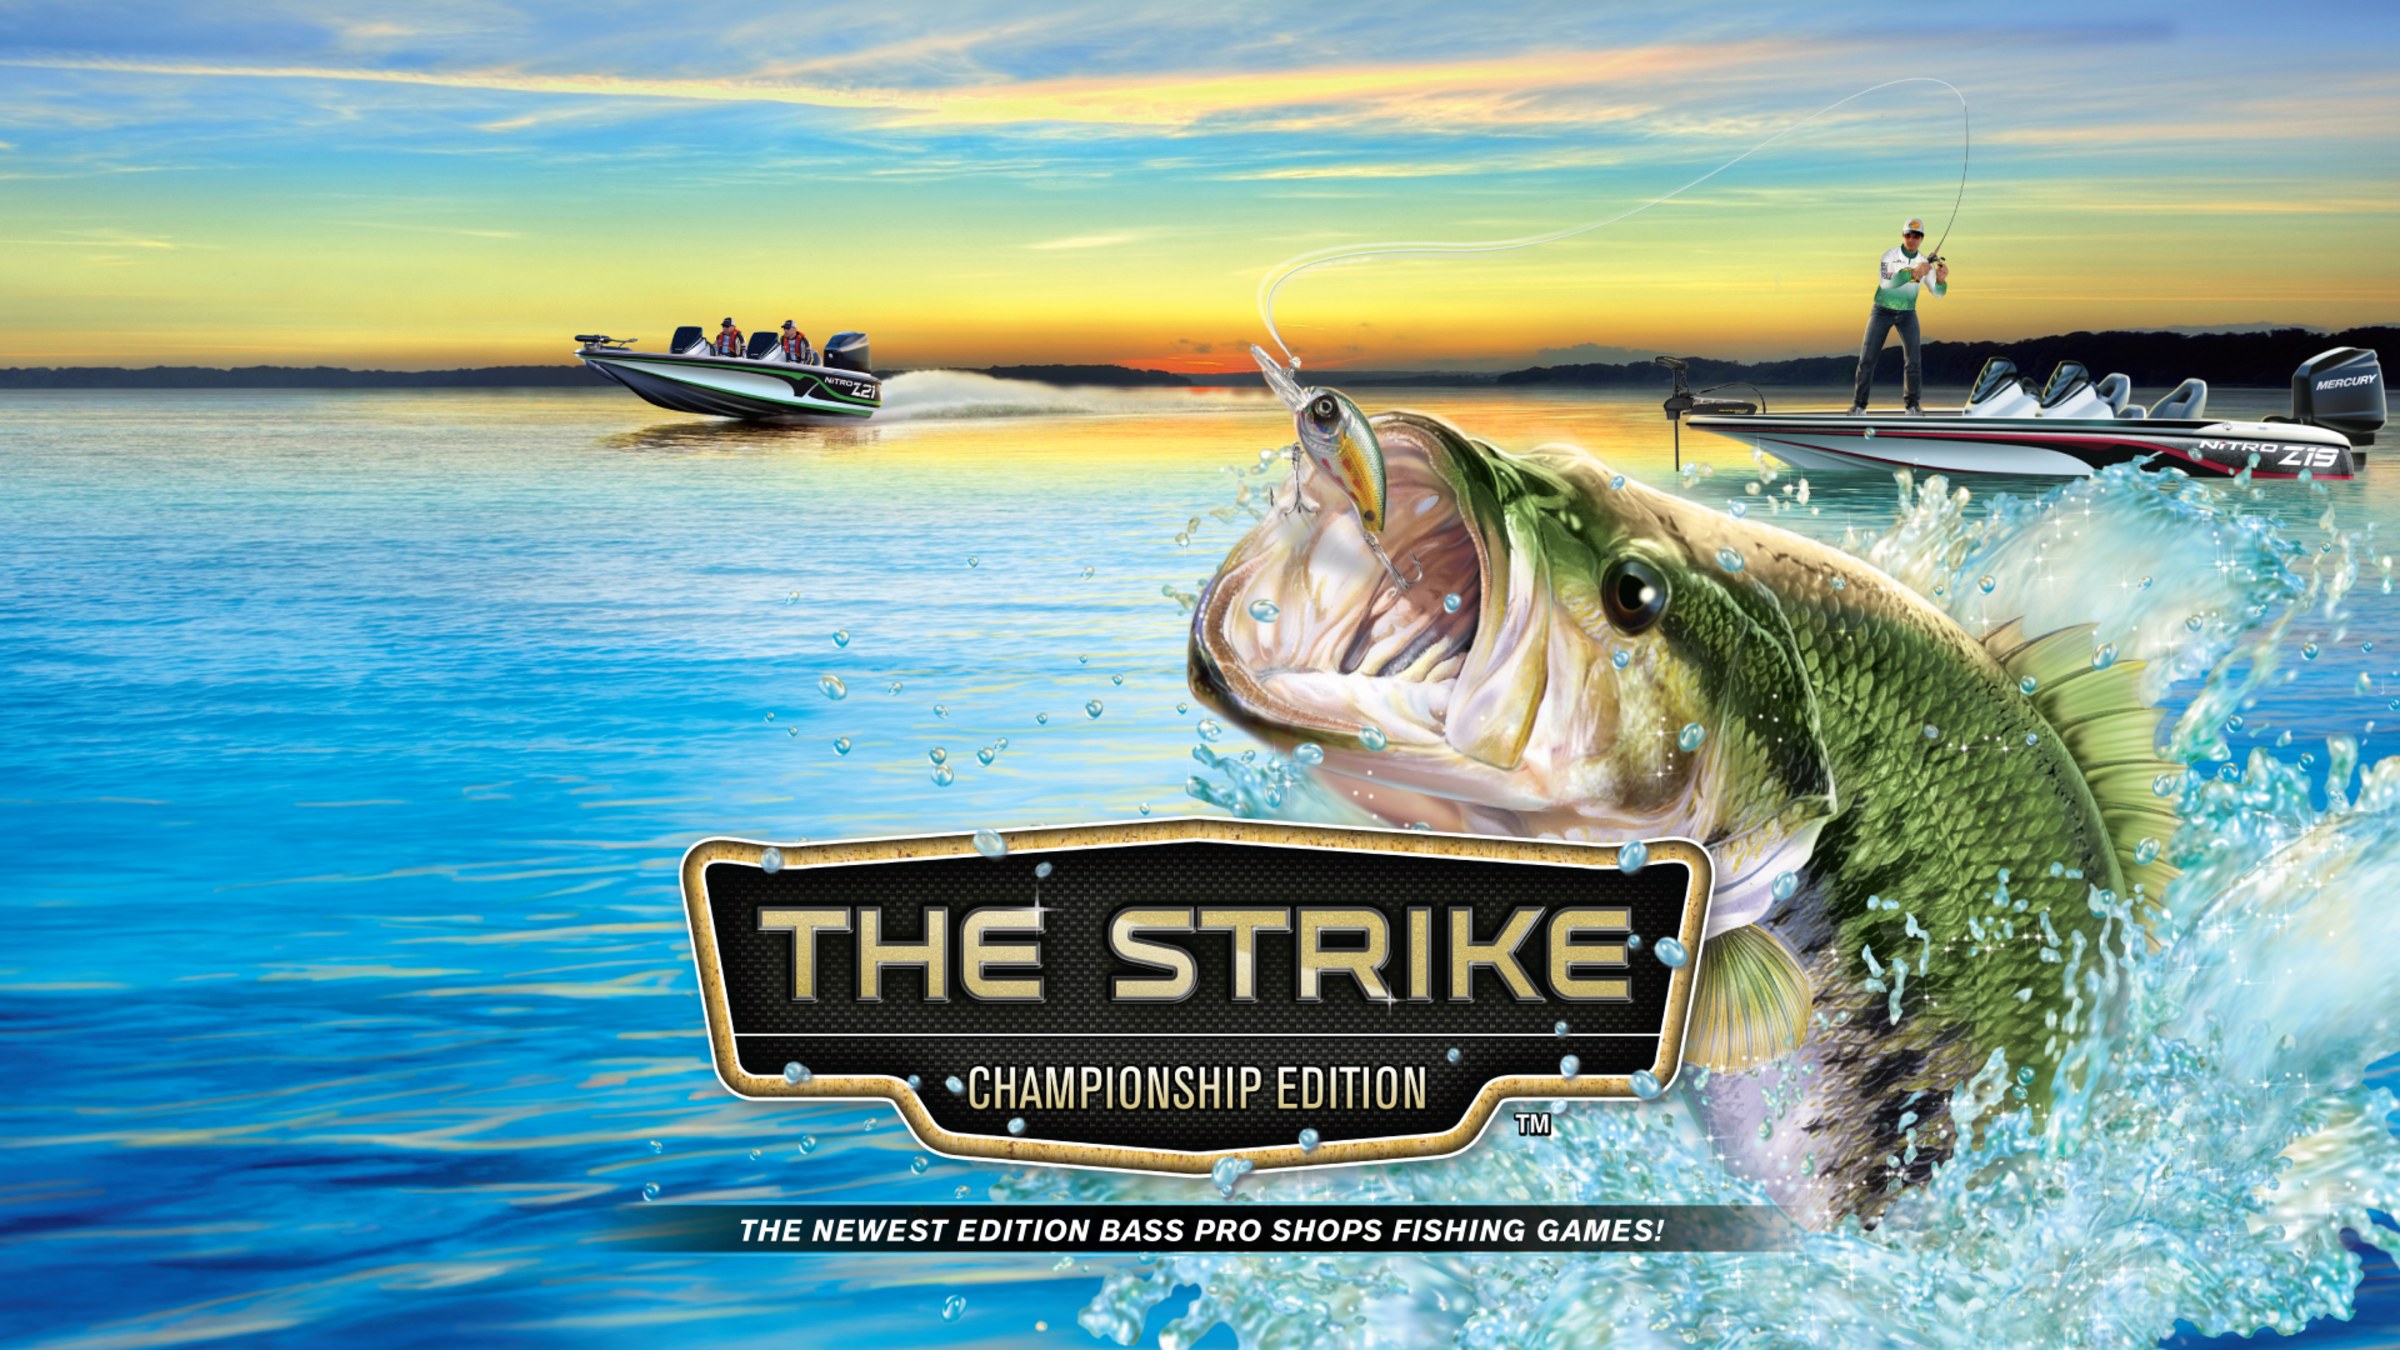 Bass Pro Shops: The Strike - Championship Edition for Nintendo